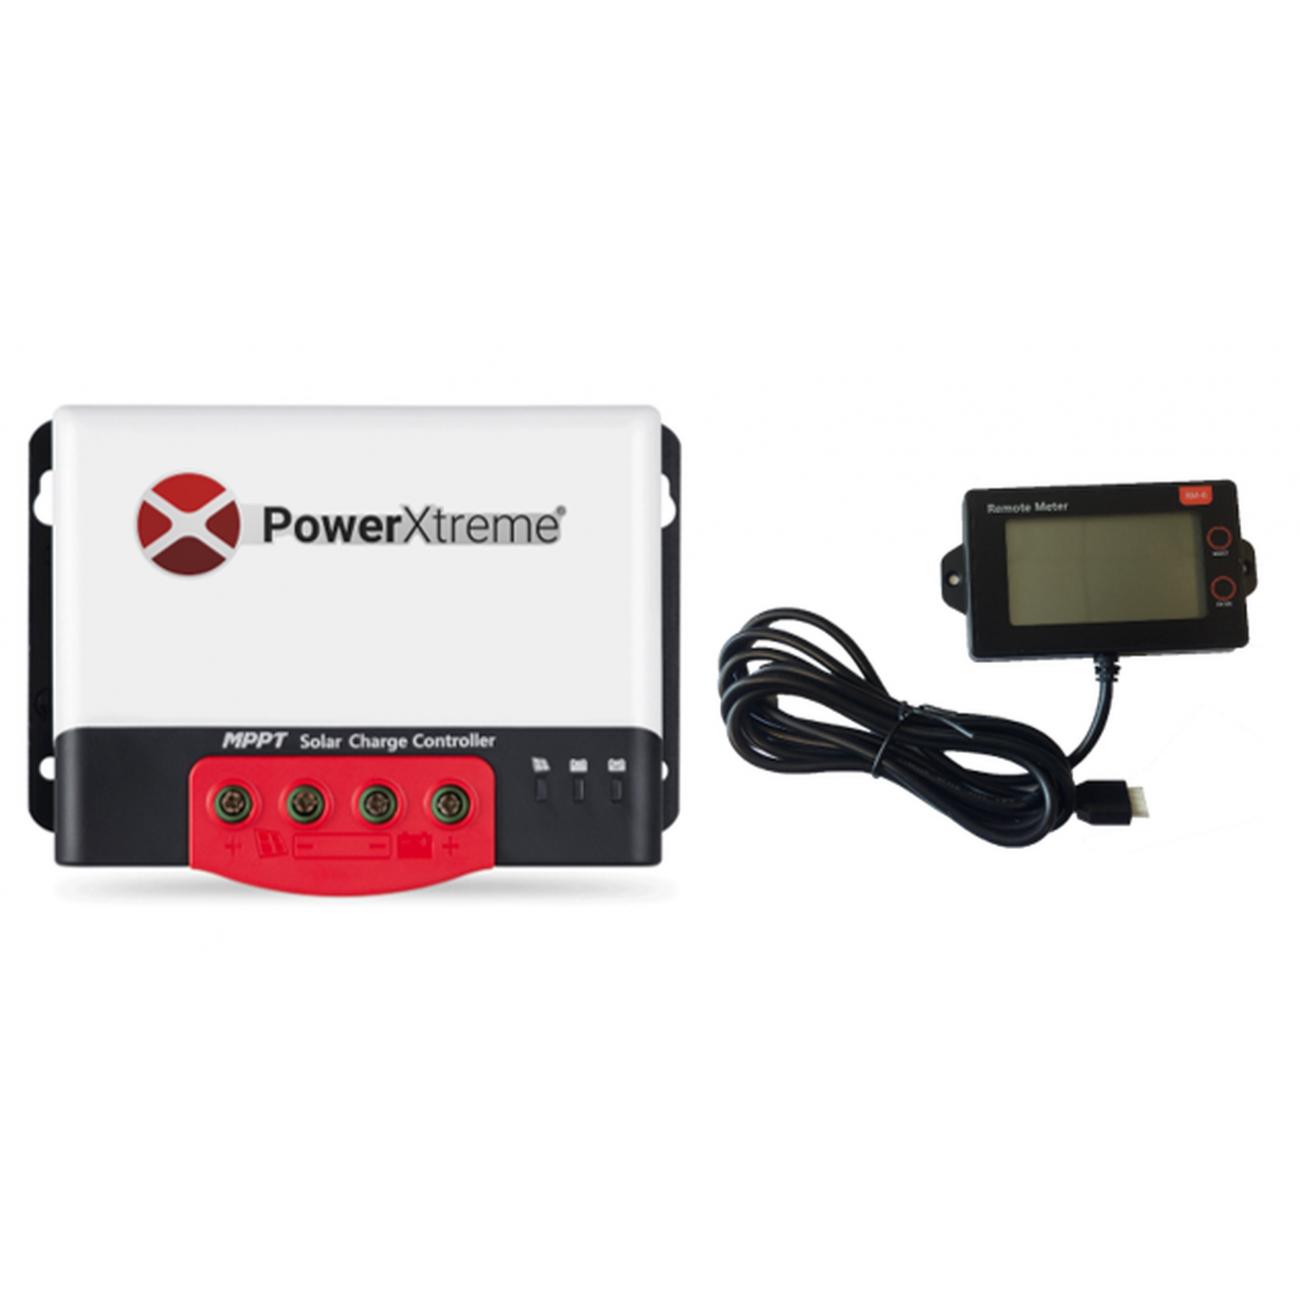 PowerXtreme XS20s Solar MPPT Charger Met Display